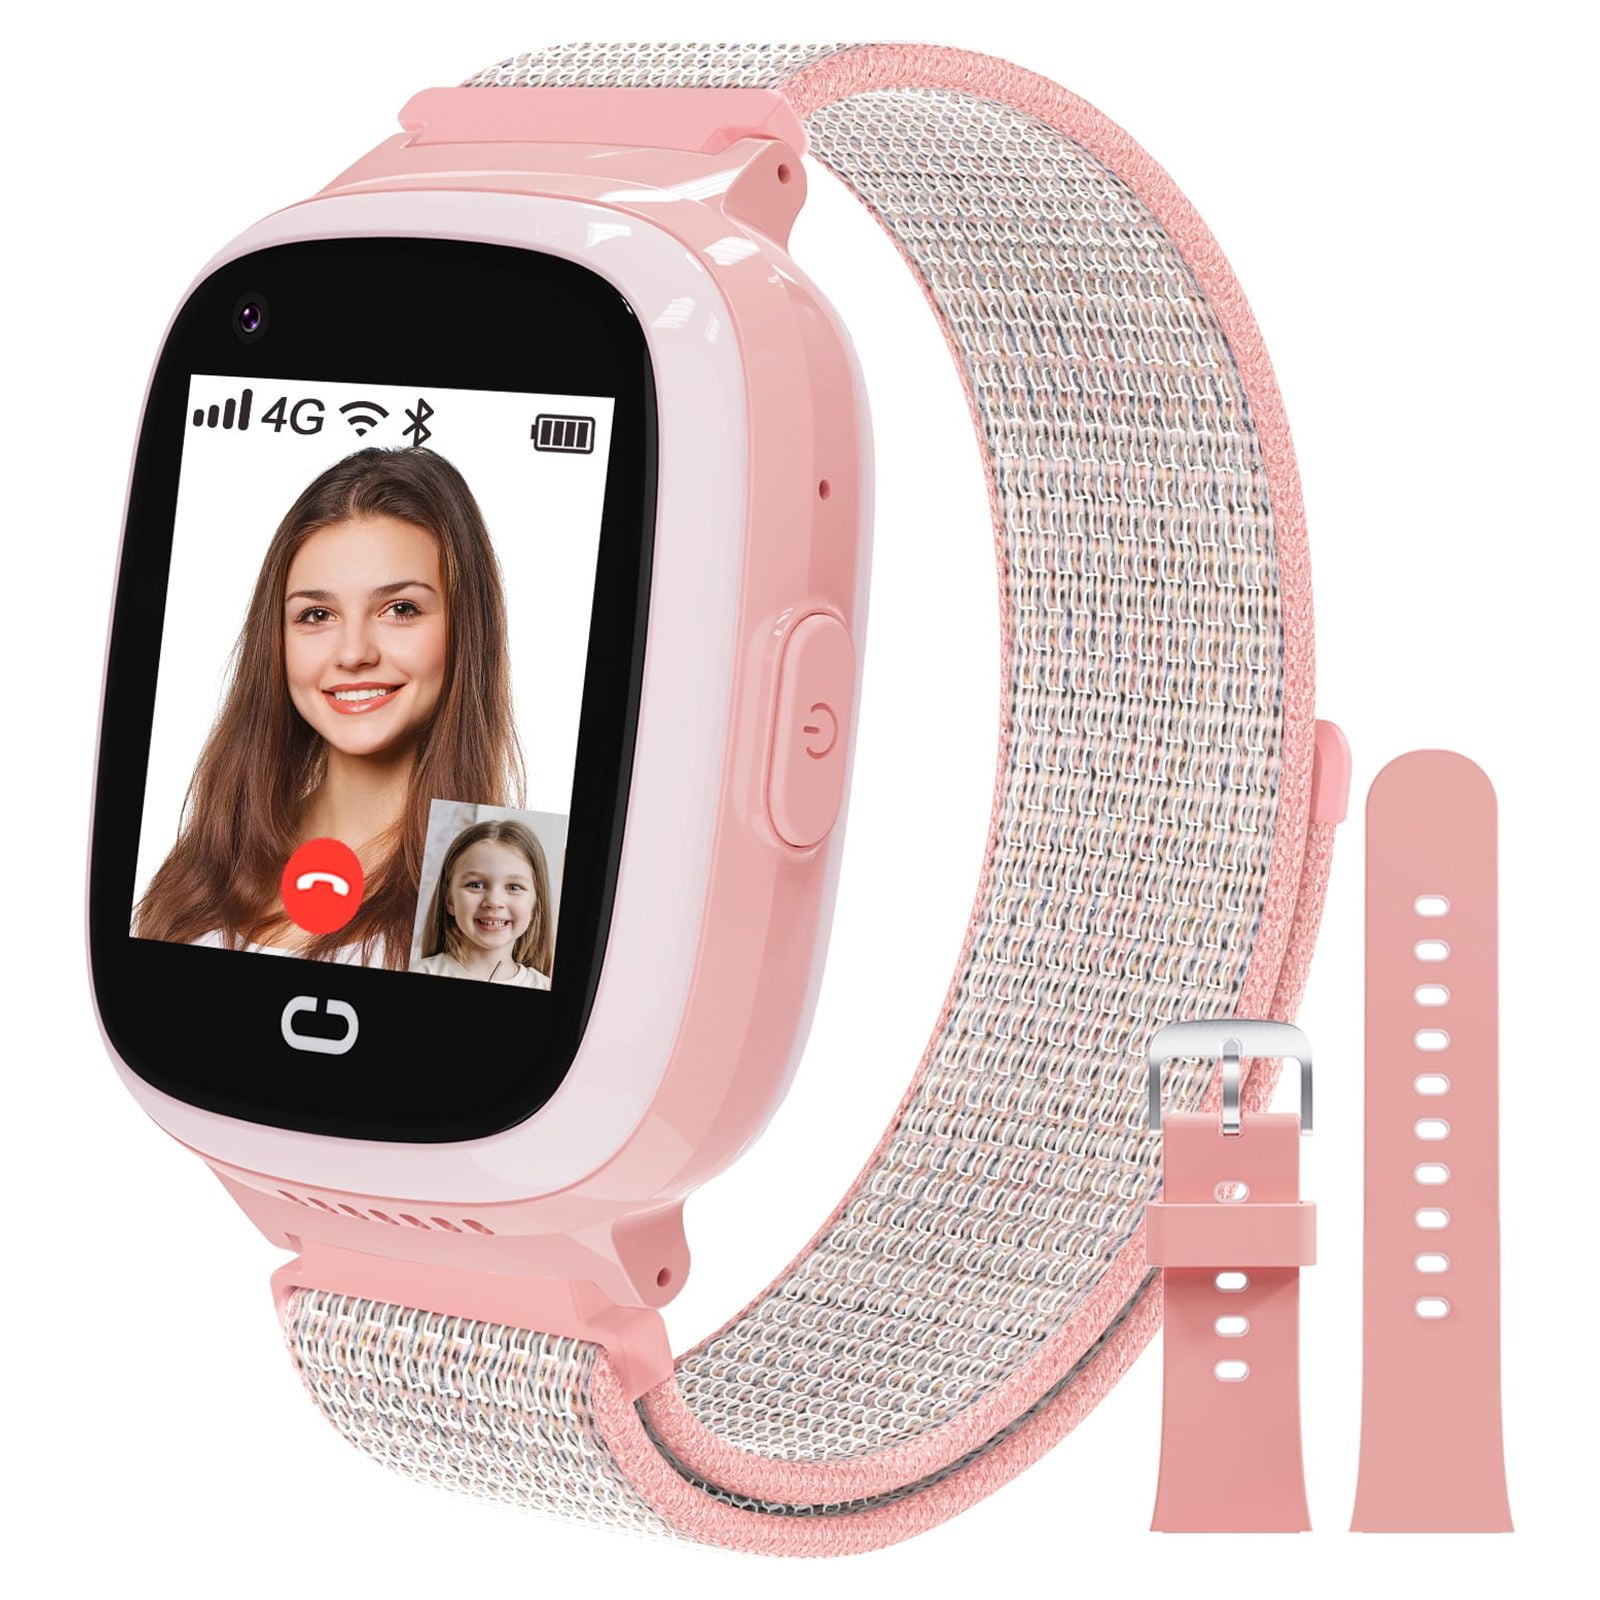  TickTalk 4 Unlocked 4G LTE Kids Smart Watch Phone with GPS  Tracker, Combines Video, Voice and Wi-Fi Calling, Messaging, 2X Cameras &  Free Streaming Music : Electronics